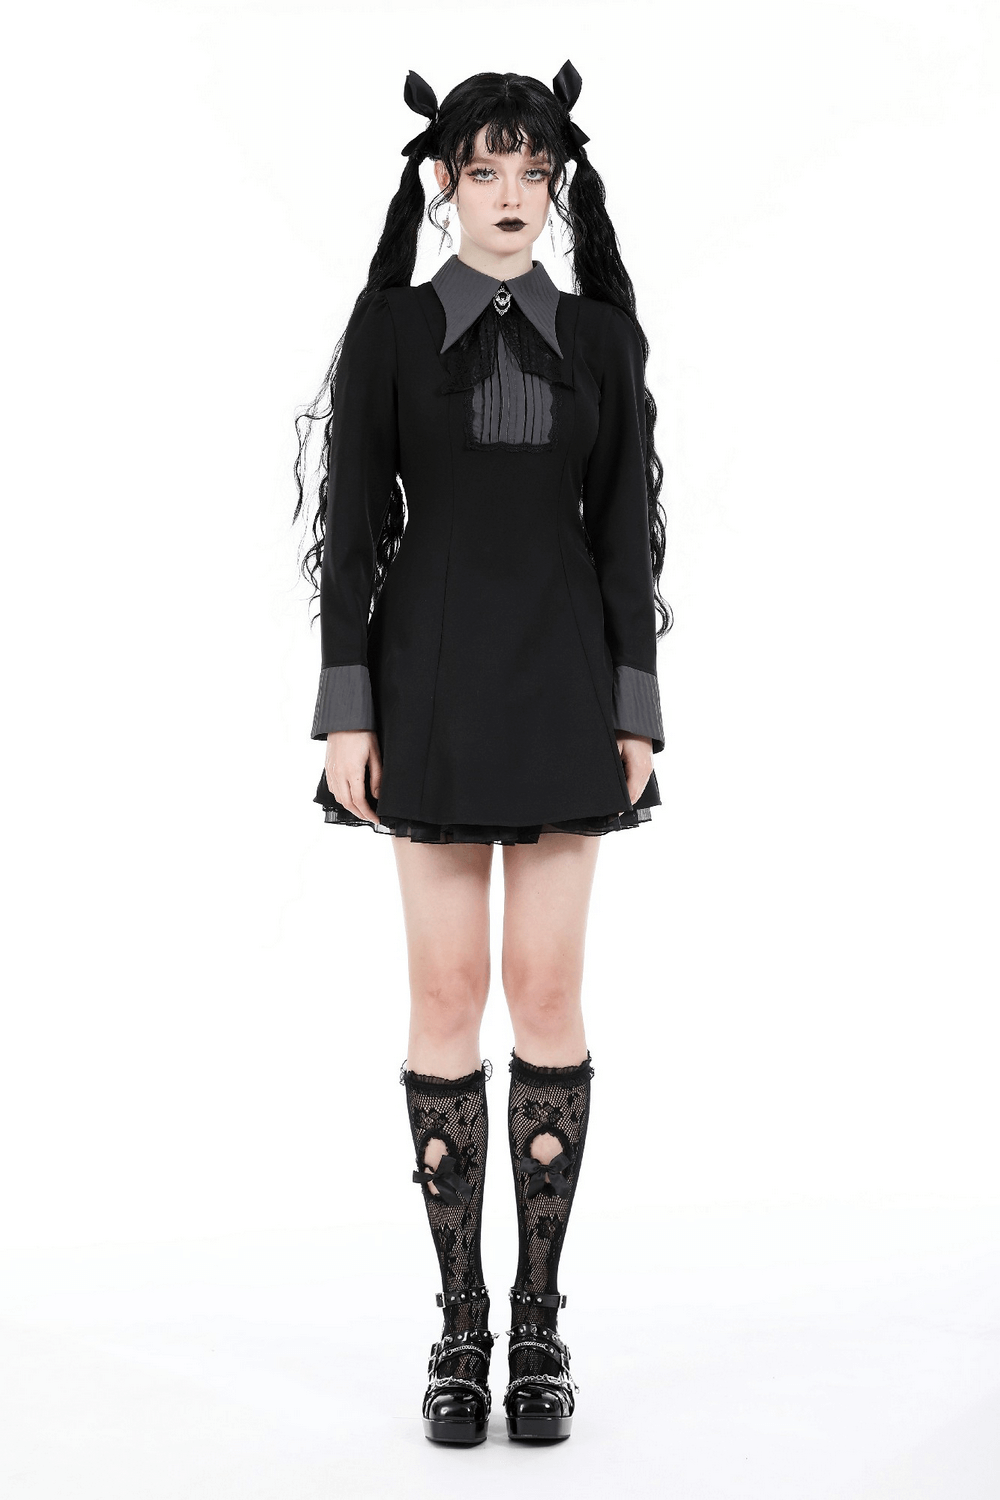 Chic Dark Long Sleeves Dress with Collar and Brooch